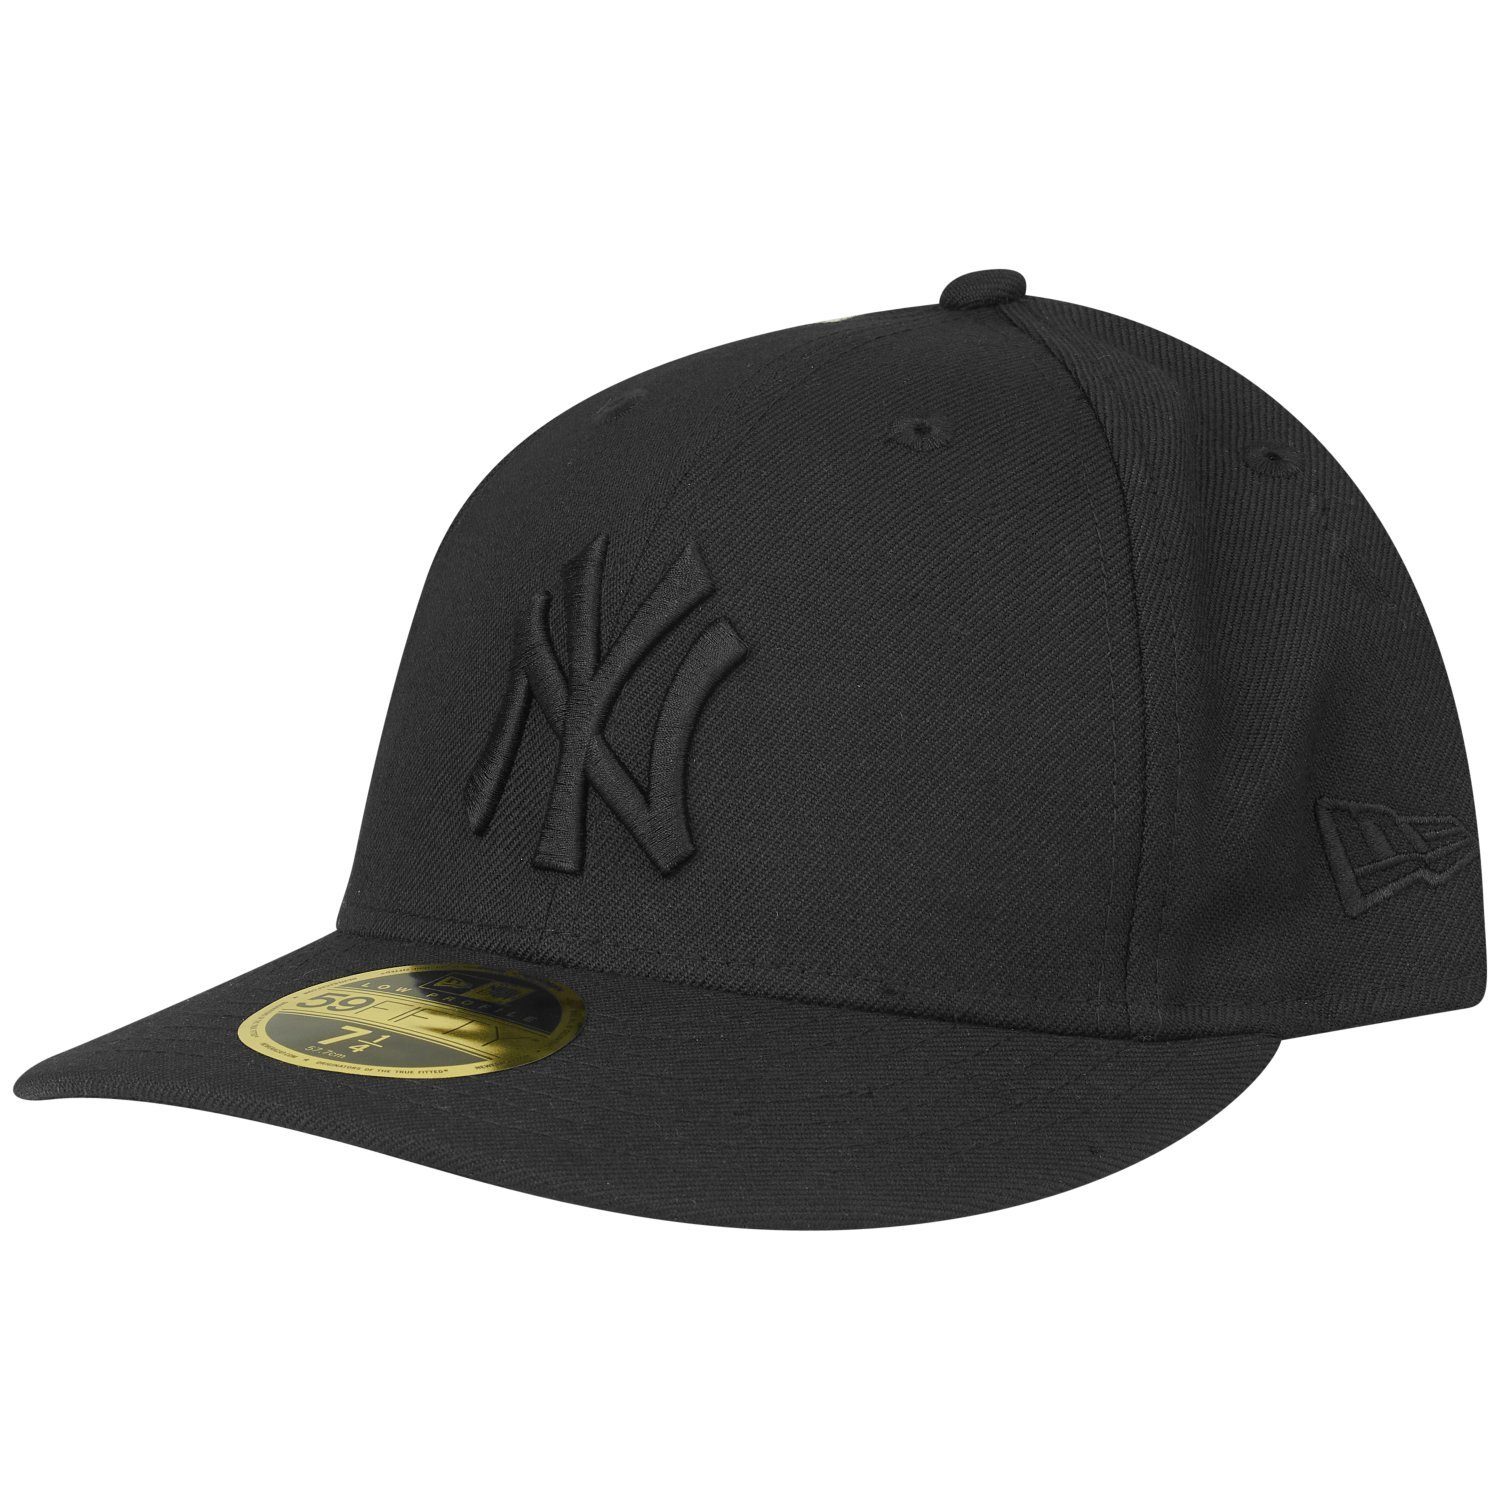 Cap Yankees New New Profile York Fitted 59Fifty Era Low